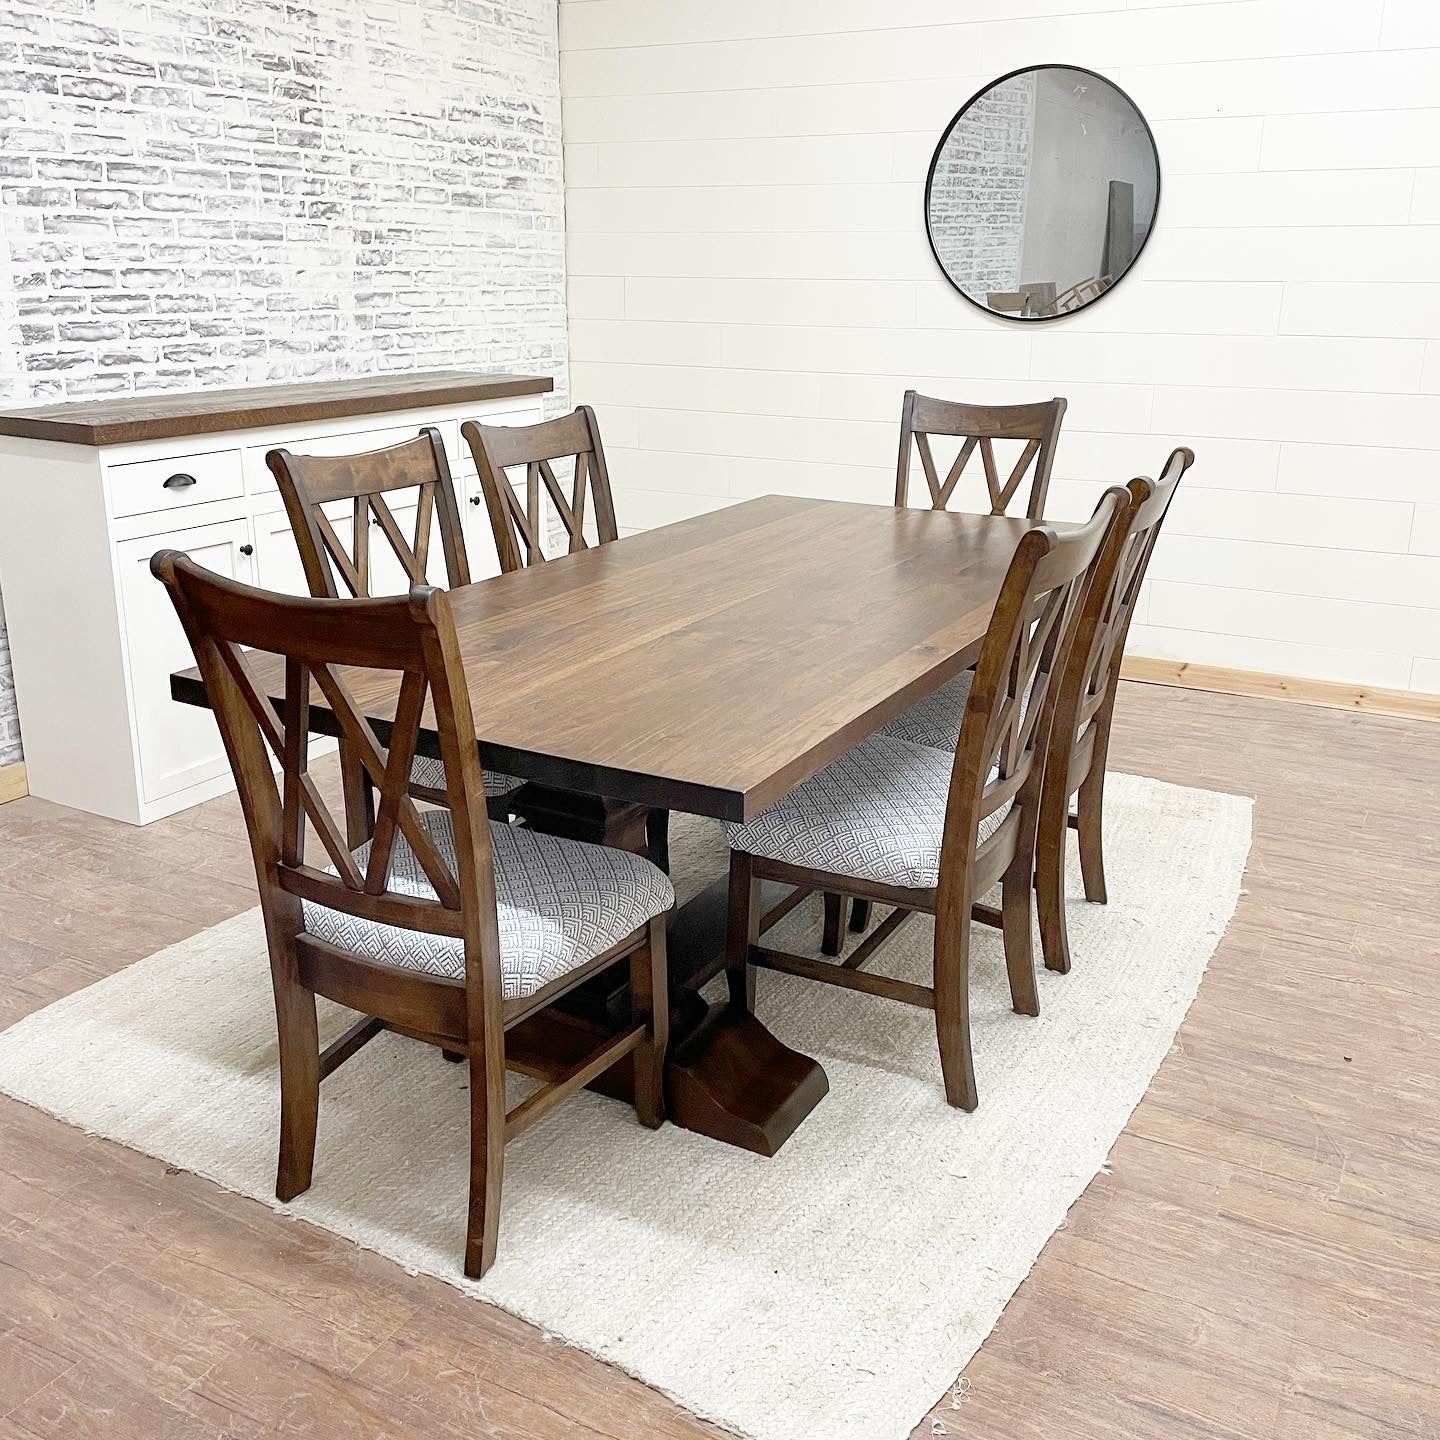 Pictured with a 7' L x 42" W Walnut top and base stained Honey. Pictured with 6 Double Cross Back Chairs with matching stain and upholstered seats with fabric provided by client.